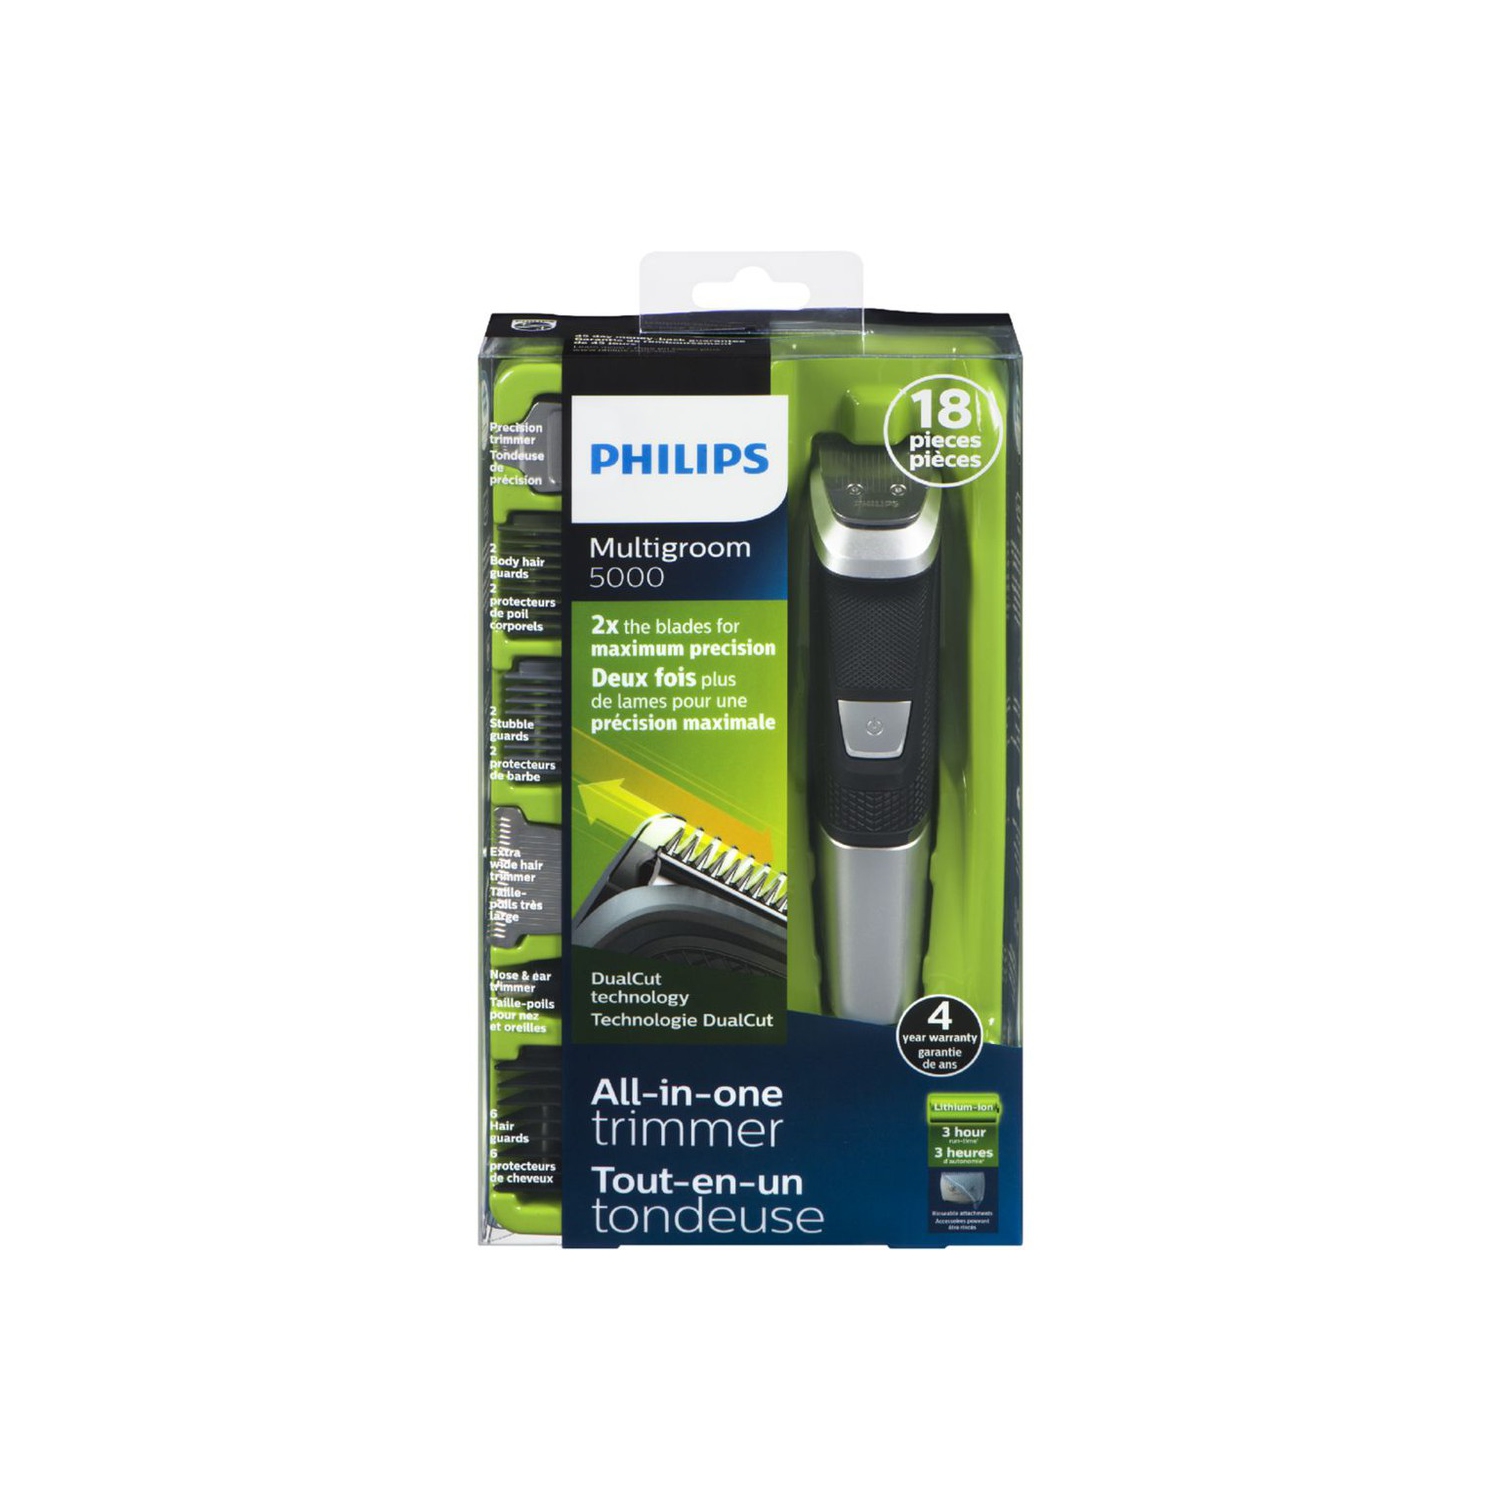 Philips Multigroom Trimmer Series 5000 | All-in-One With 18 Attachments- DualCut Technology- MG5750/18 - Brand New**- Black/Silver